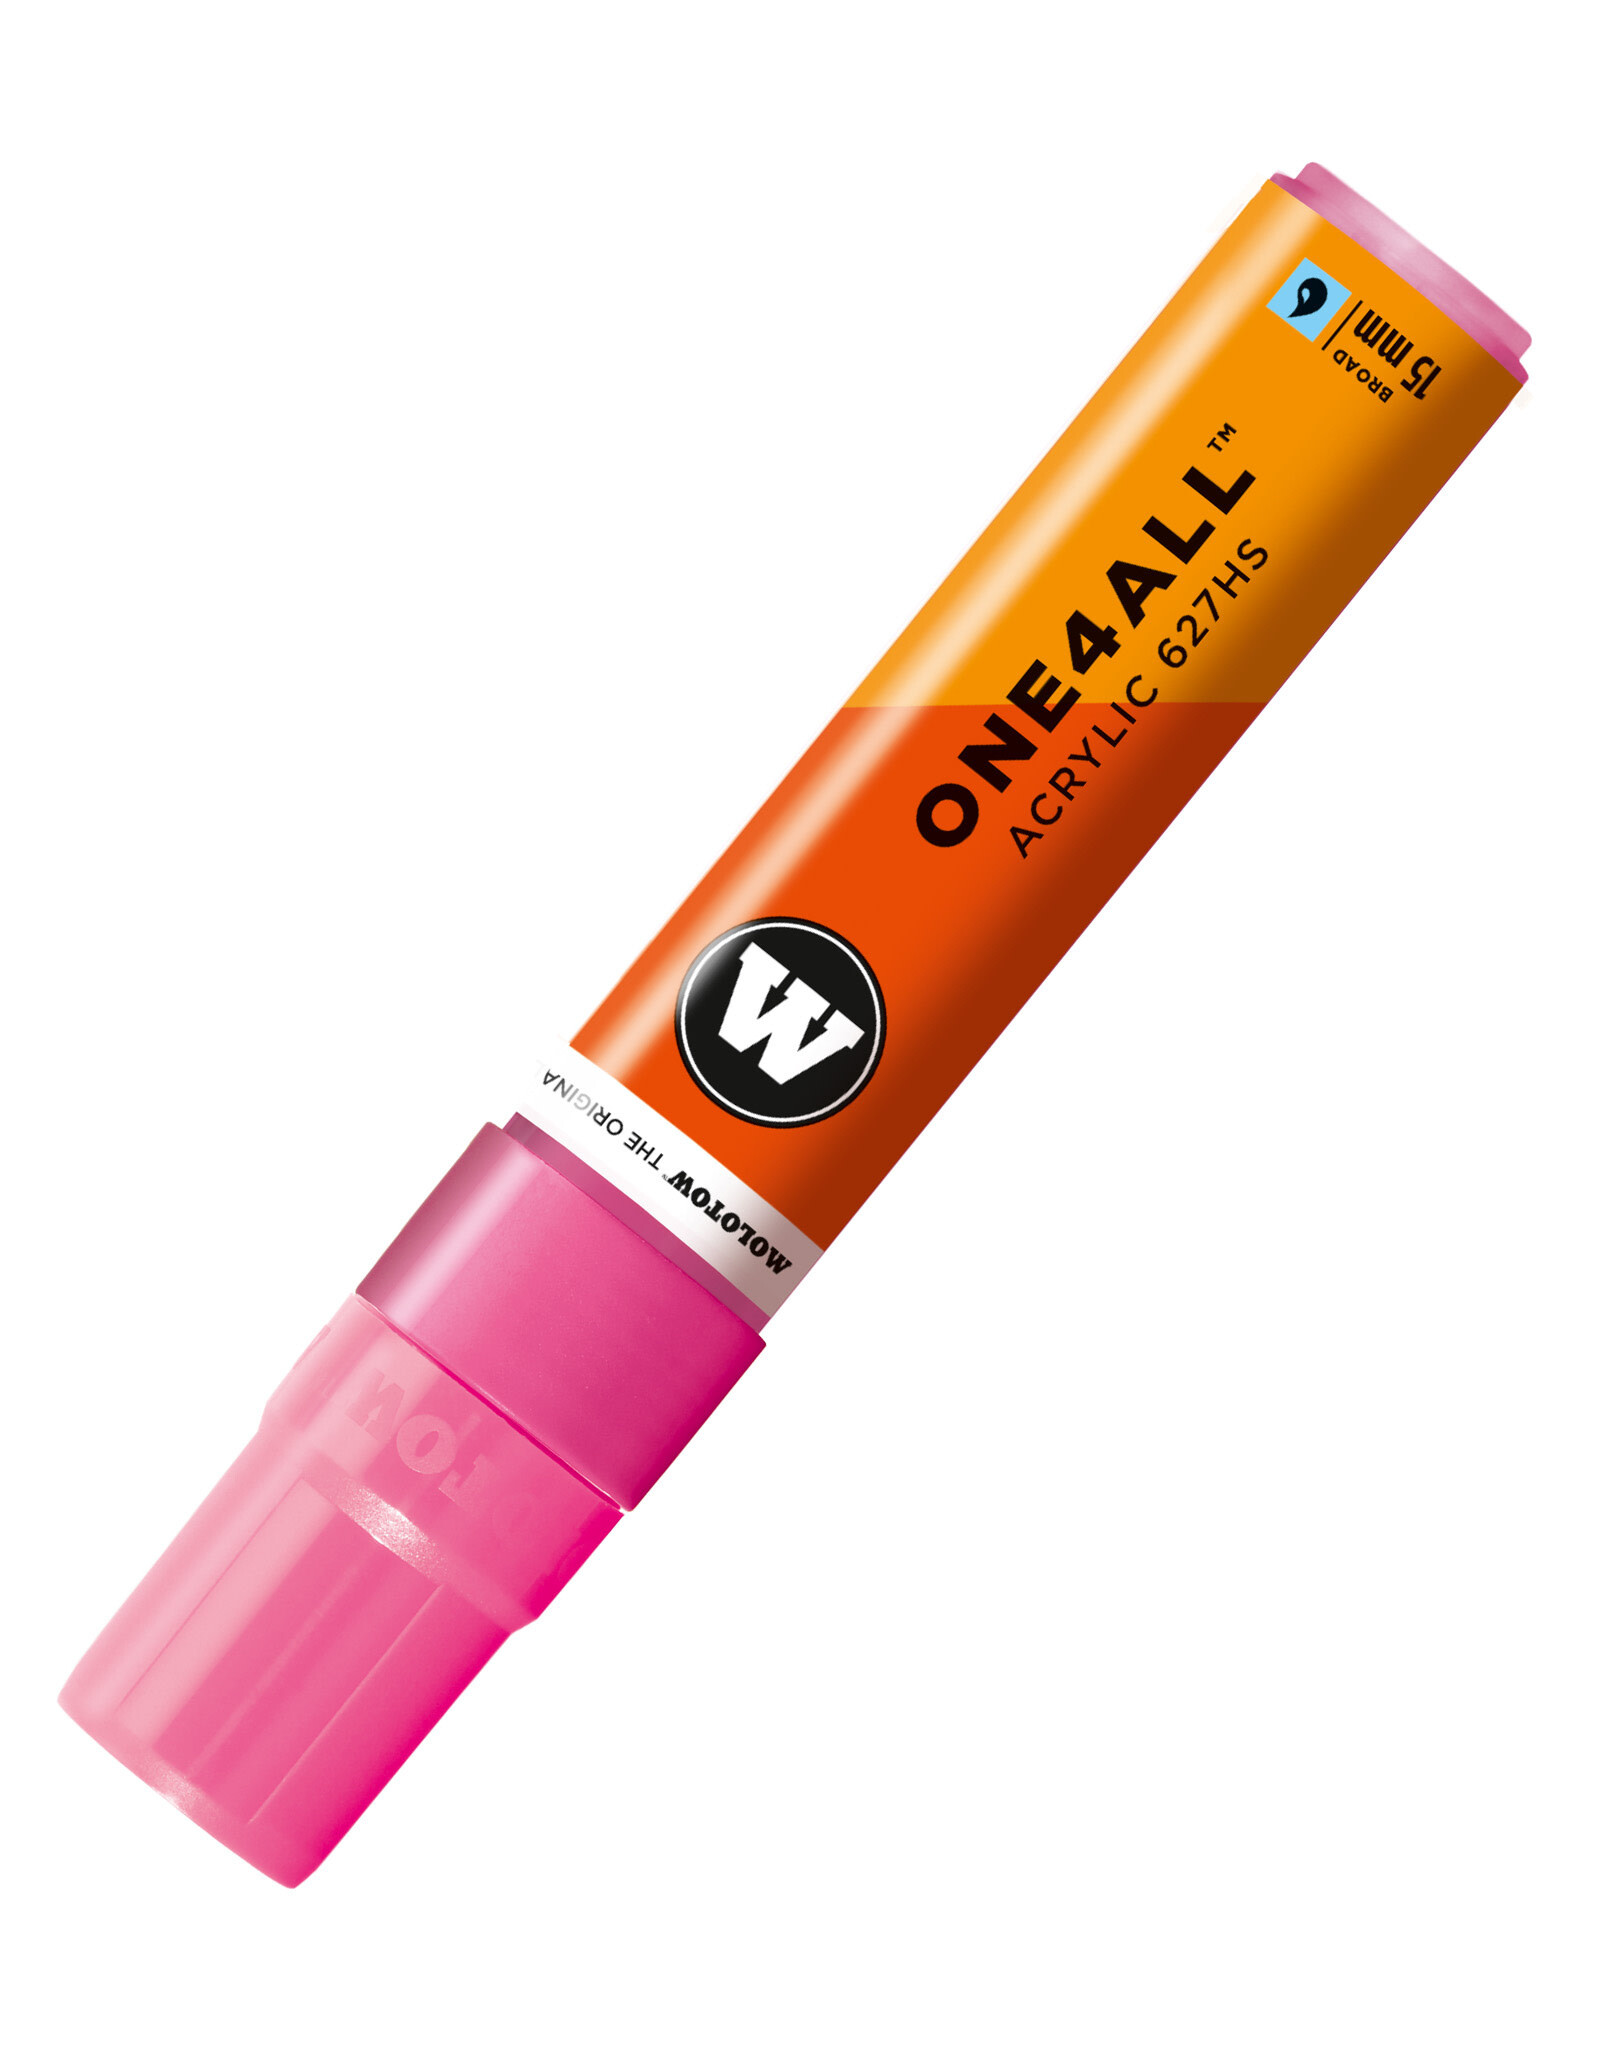 CLEARANCE Molotow ONE4ALL Paint Marker, Neon Pink 15mm